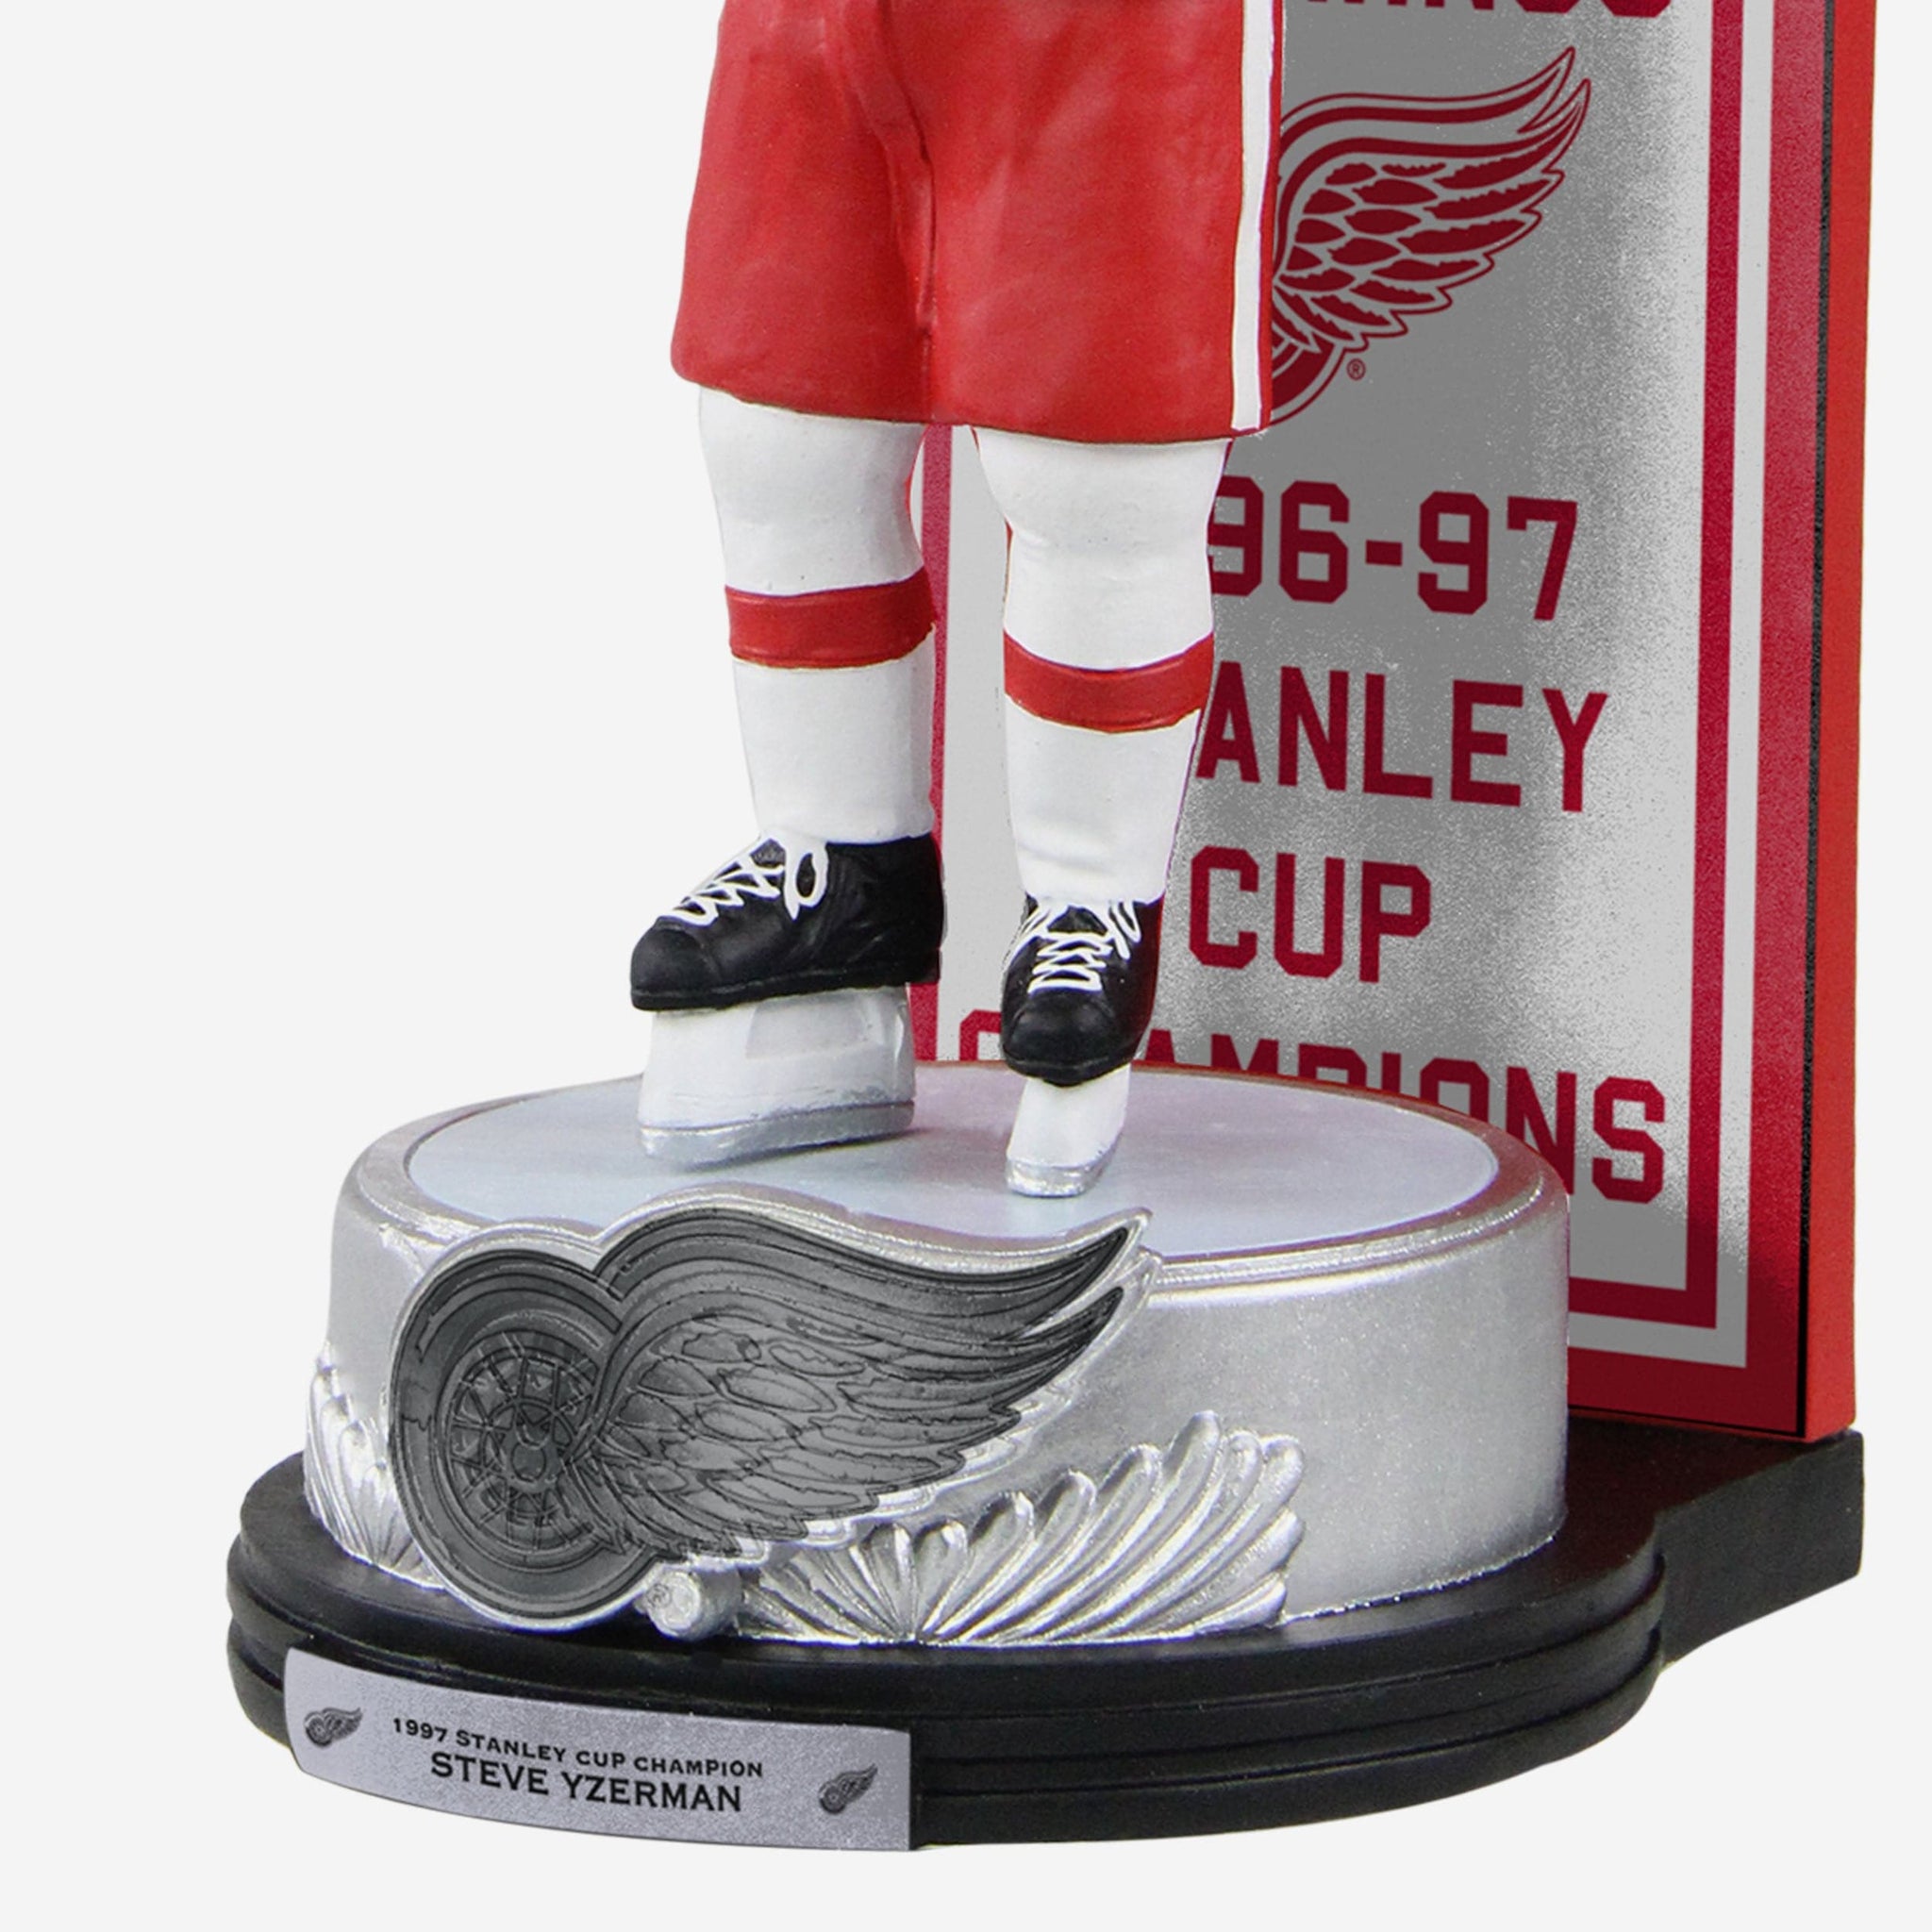 Detroit Red Wings Tumbler Creative Gifts For Red Wings Fans